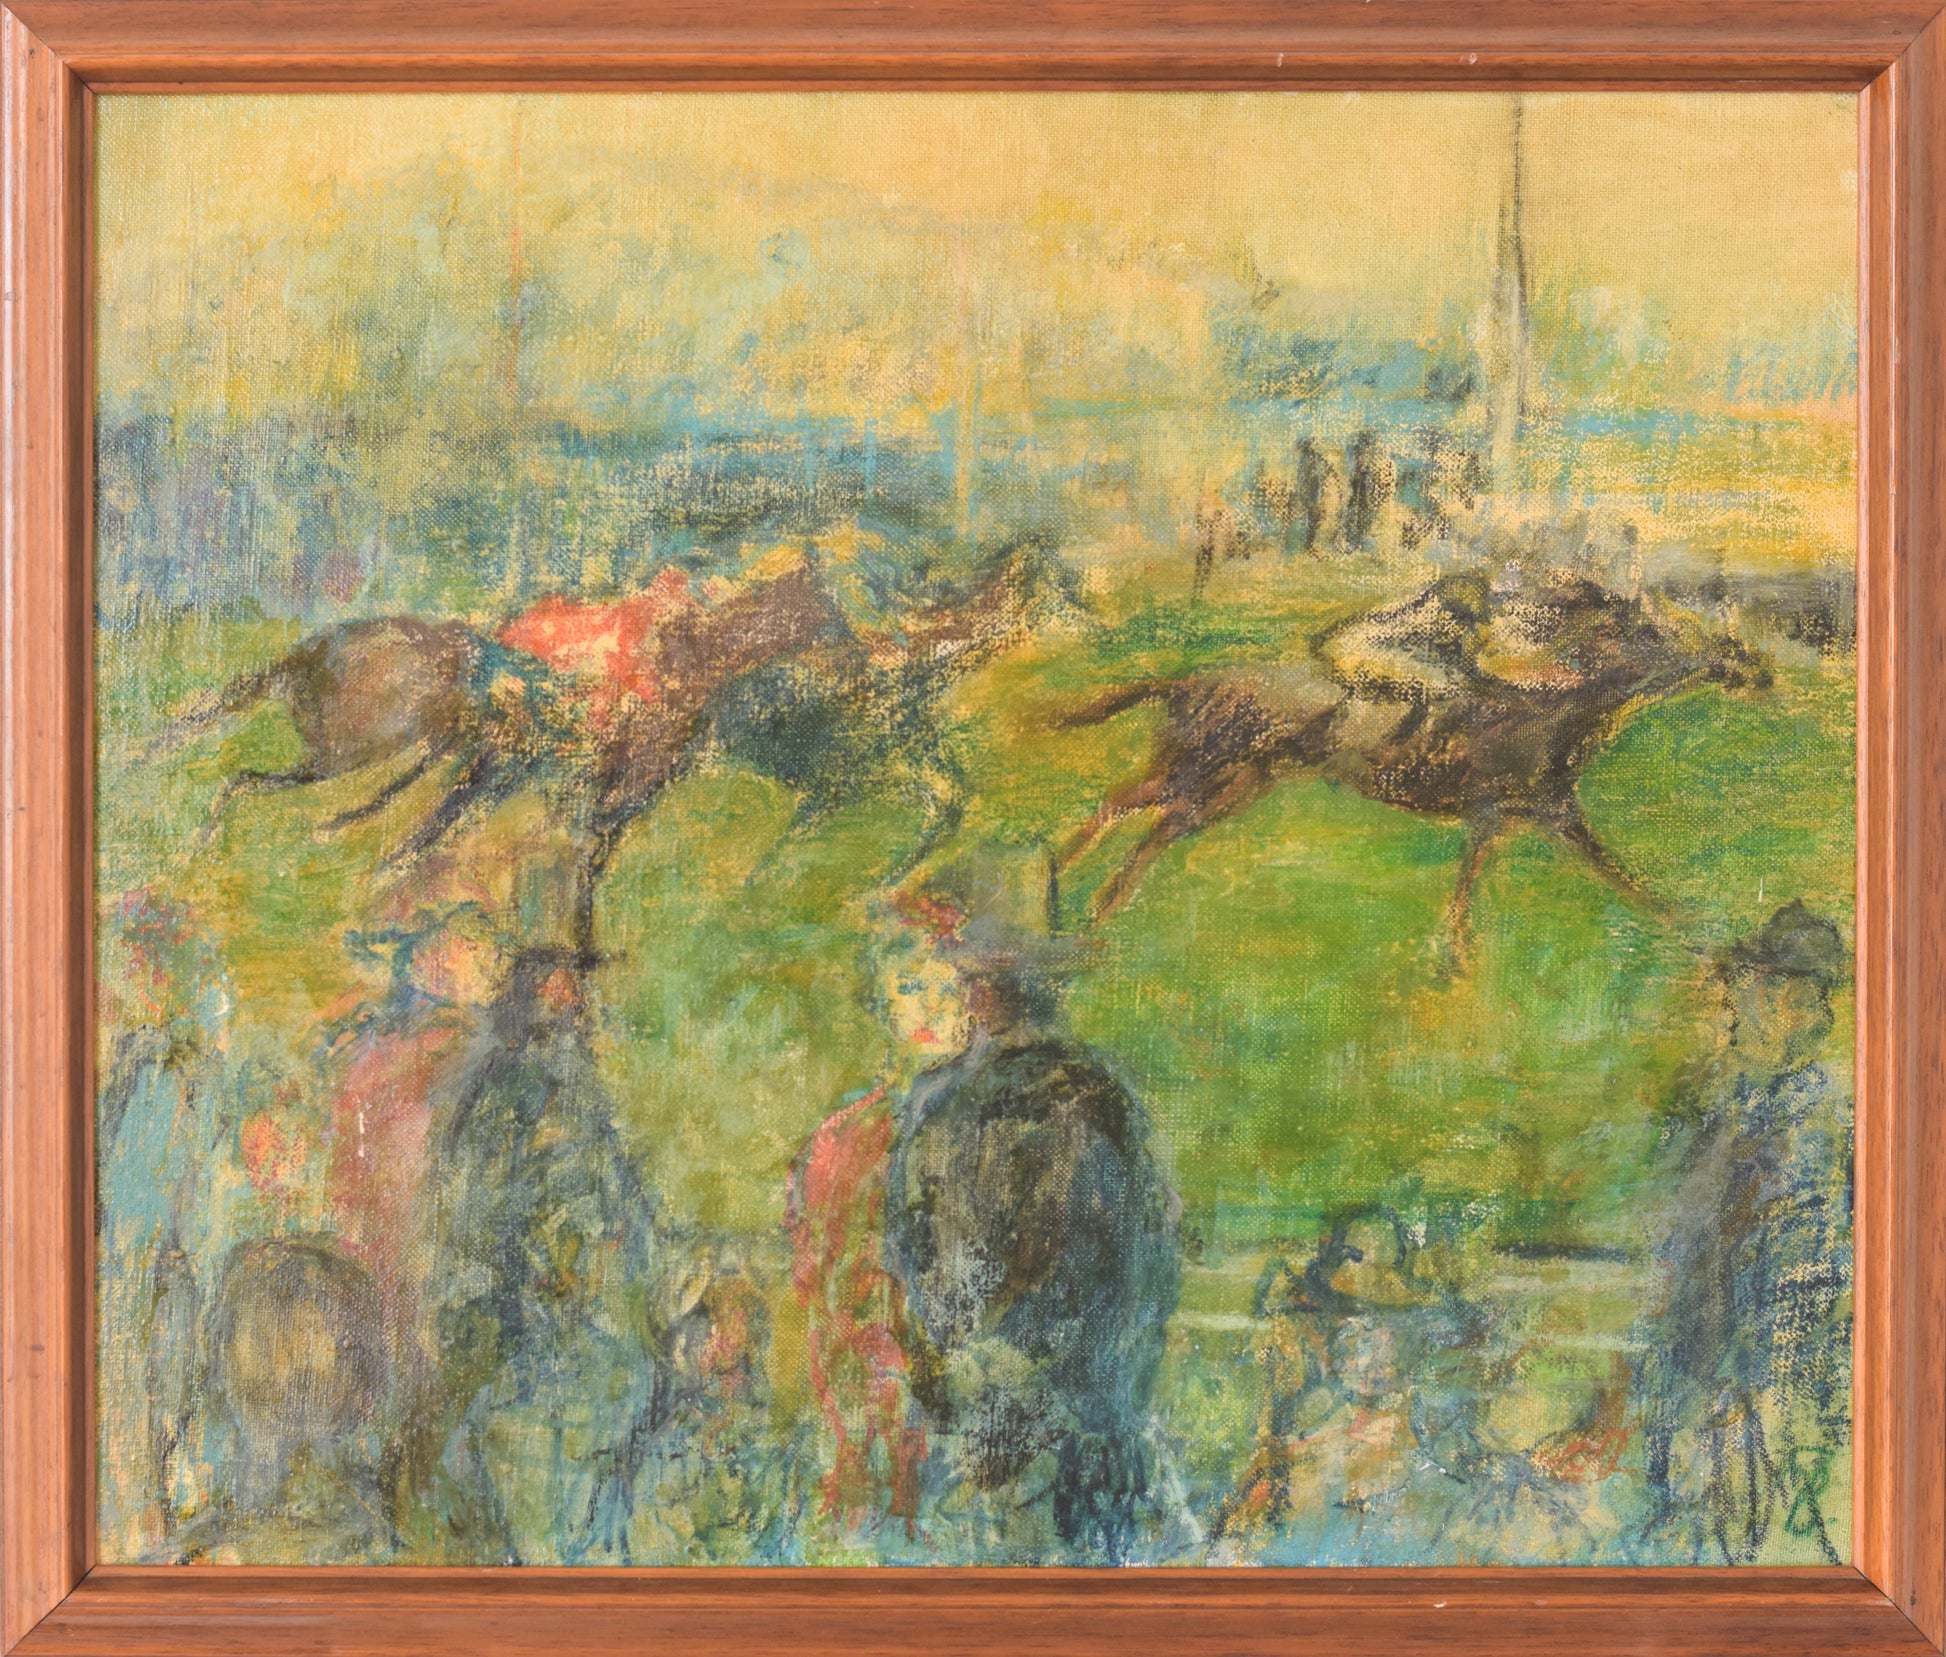 'A Day at the Races' Oil on canvas_Framed